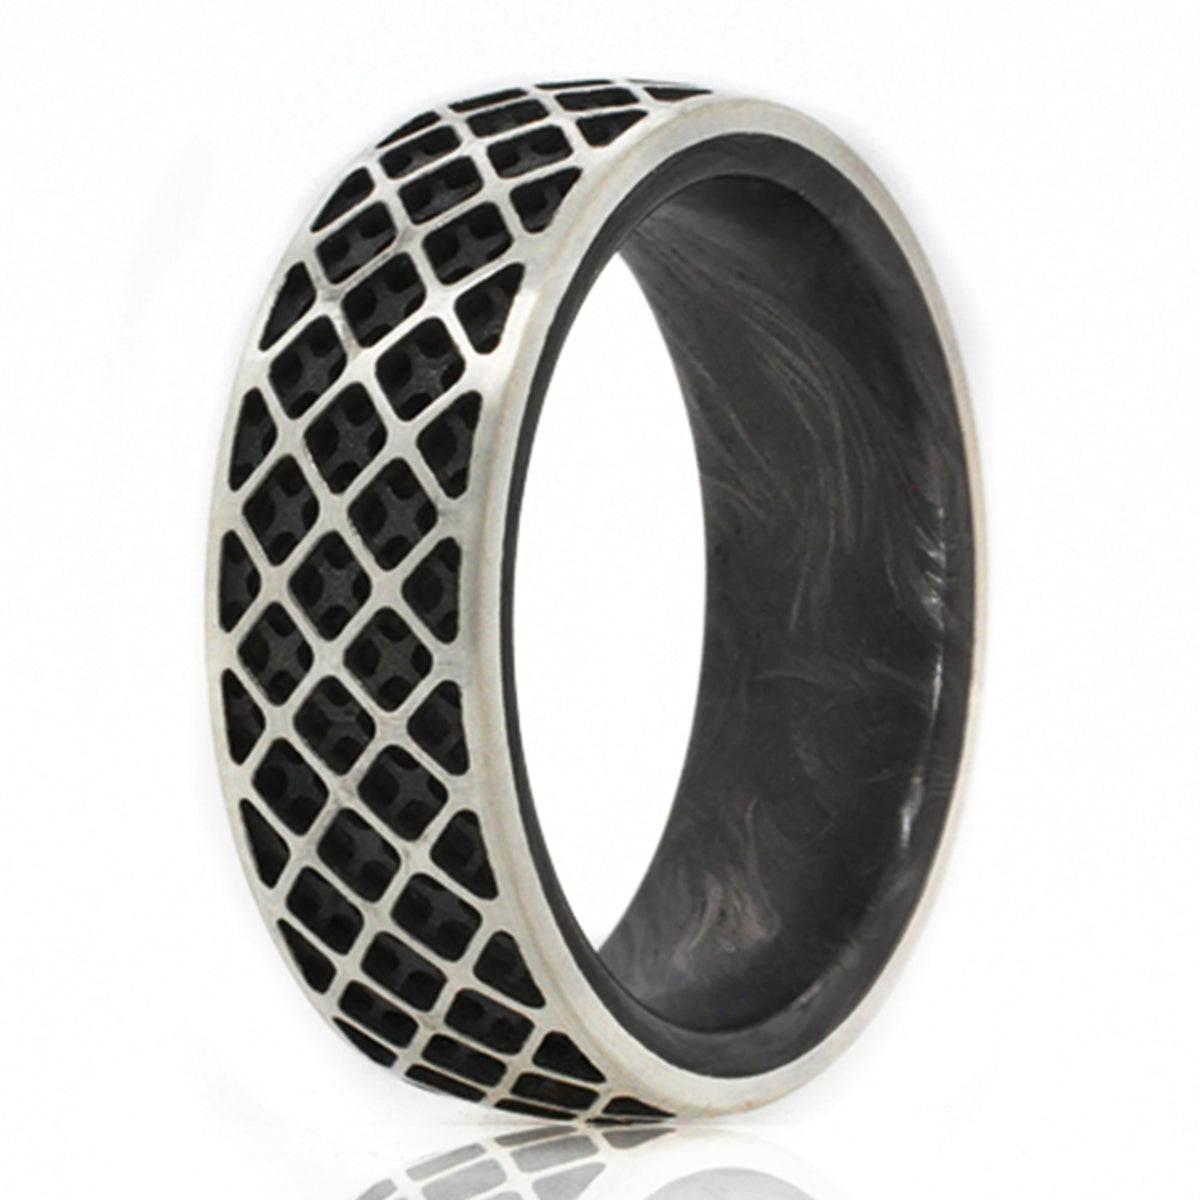 Sterling Silver and Forged Carbon Fiber ring featuring an exterior square-based grid pattern and forged carbon fiber interior. 